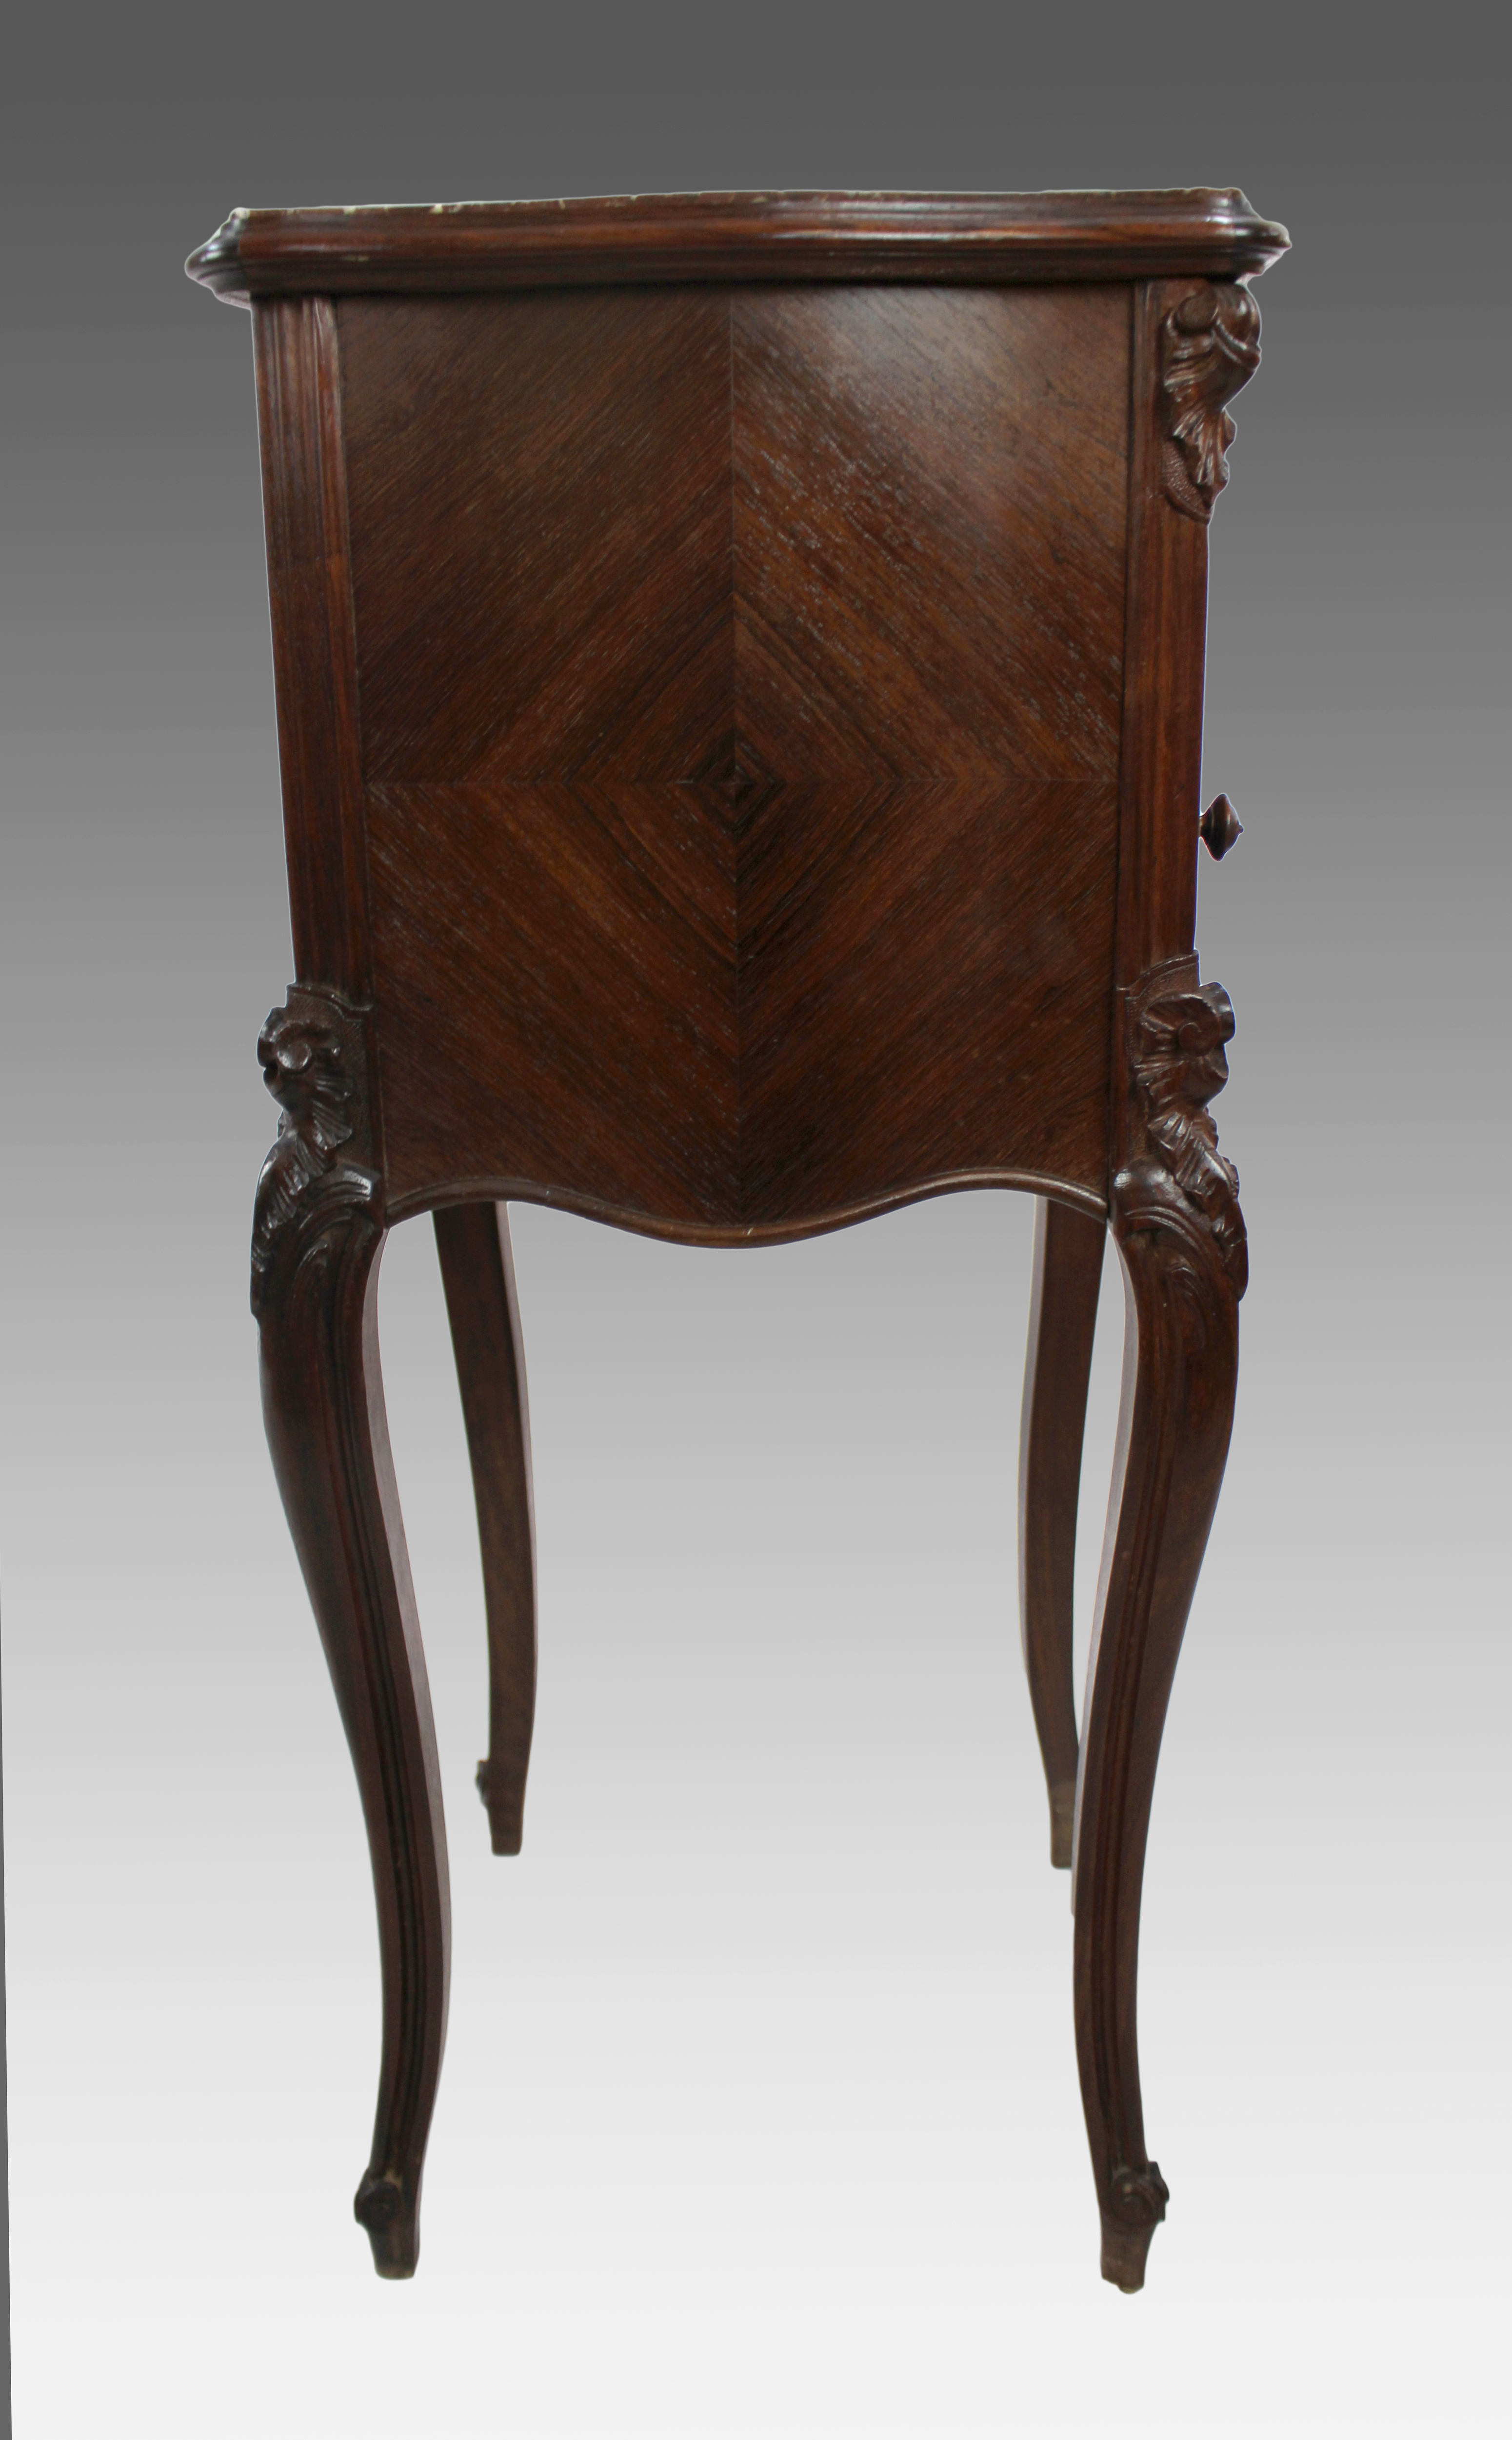 19th c. French Marble Topped Pot Cupboard - Image 4 of 7